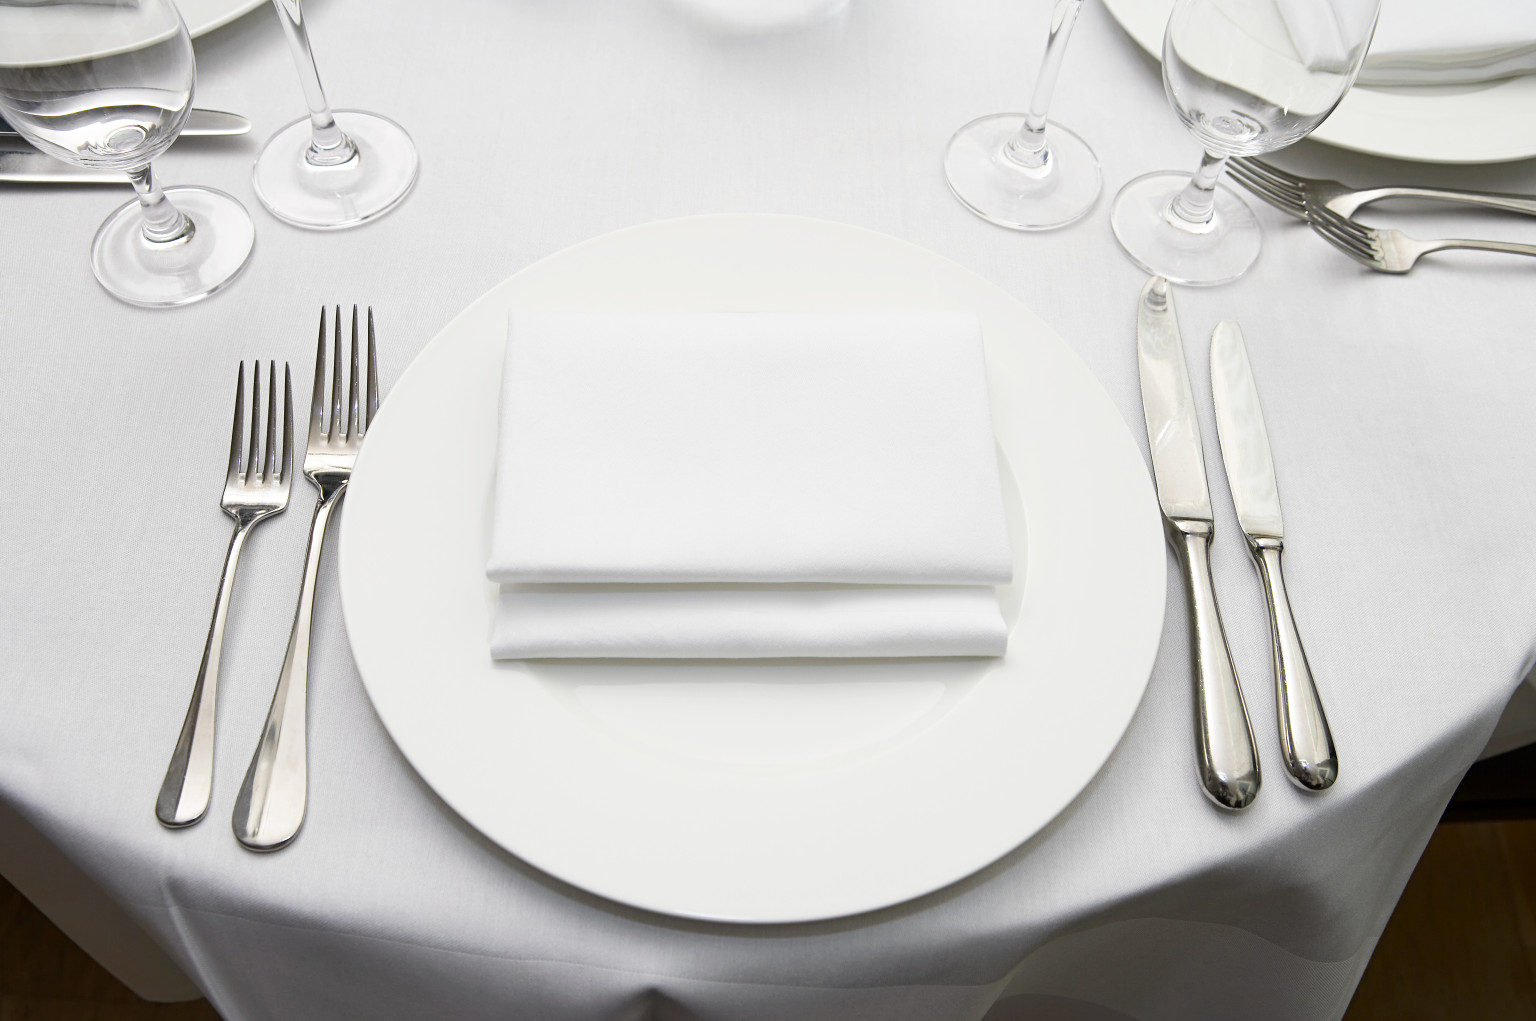 What Is It Like to Eat Alone at a Fancy Restaurant? | HuffPost